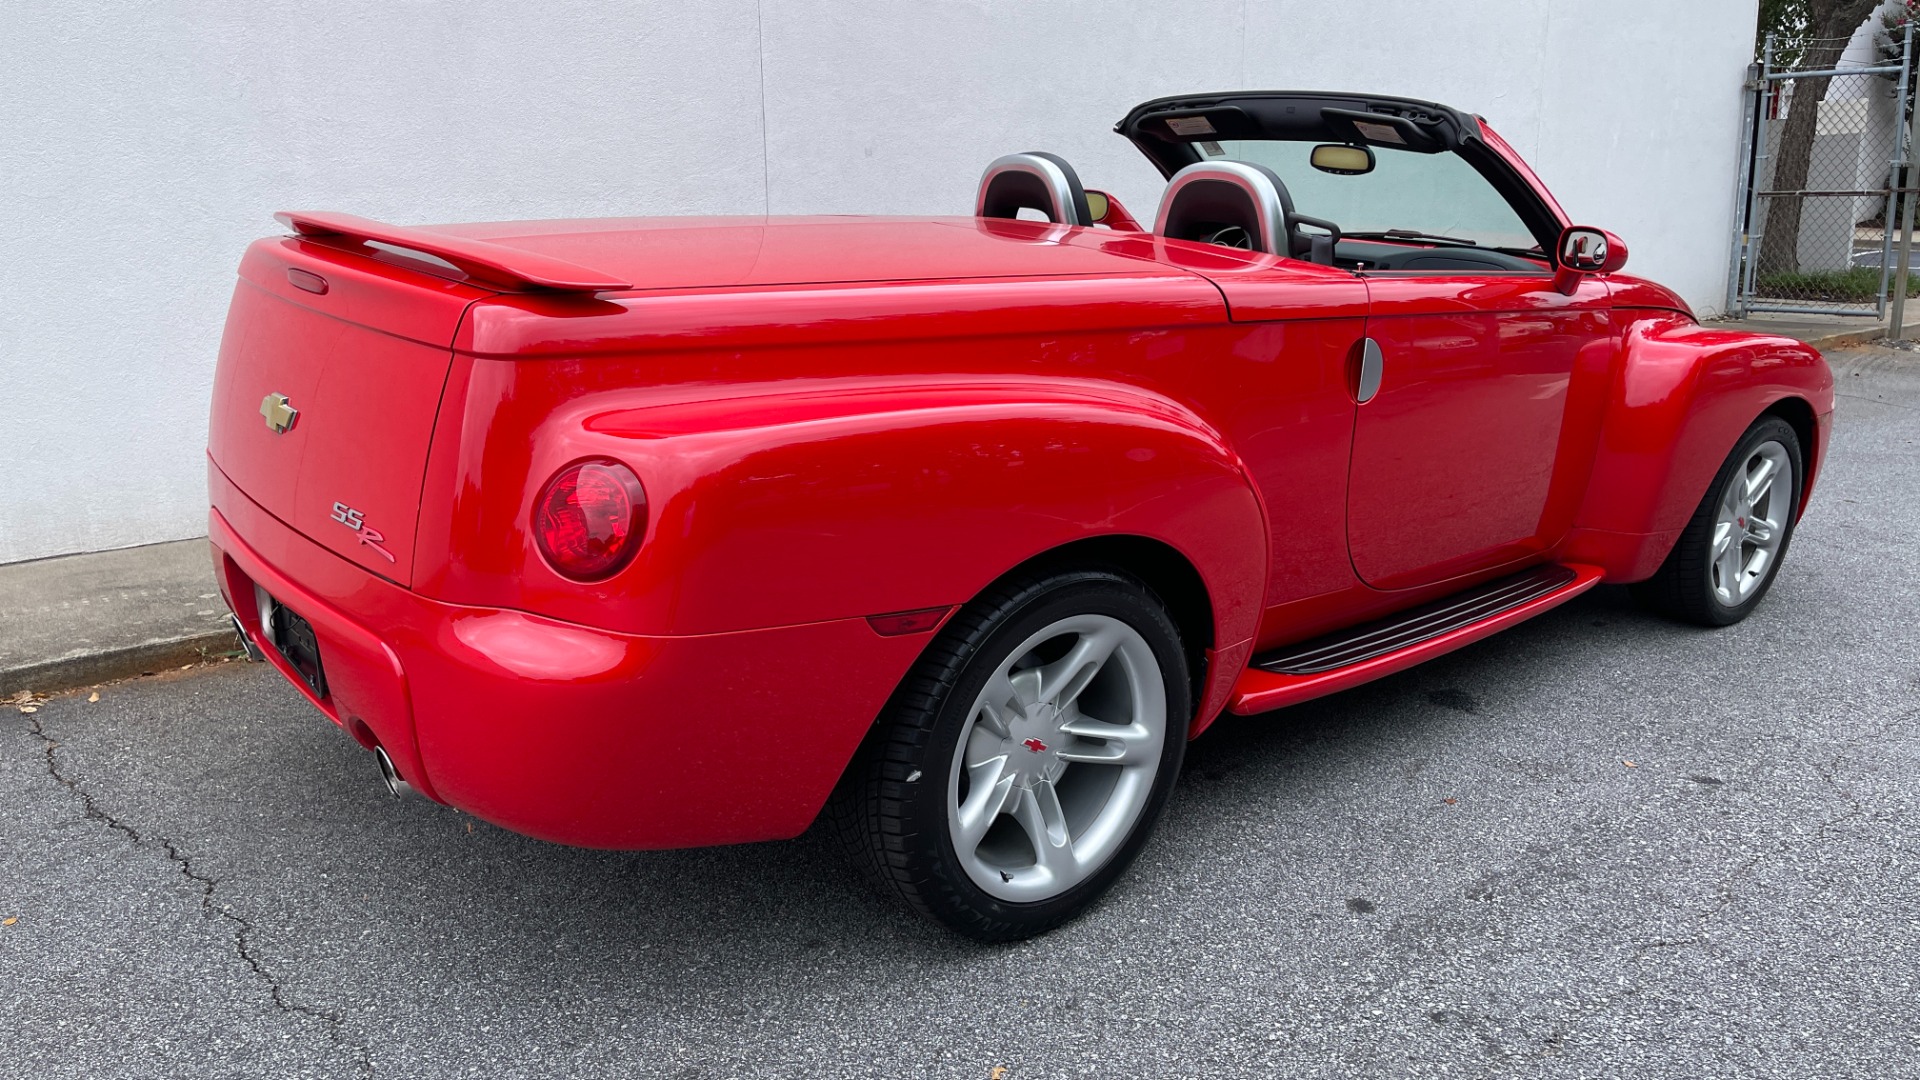 Used 2004 Chevrolet SSR LS / CONVERTIBLE / 5.3L V8 / LEATHER / HEATED SEATS / BACKUP CAMERA for sale $19,995 at Formula Imports in Charlotte NC 28227 5